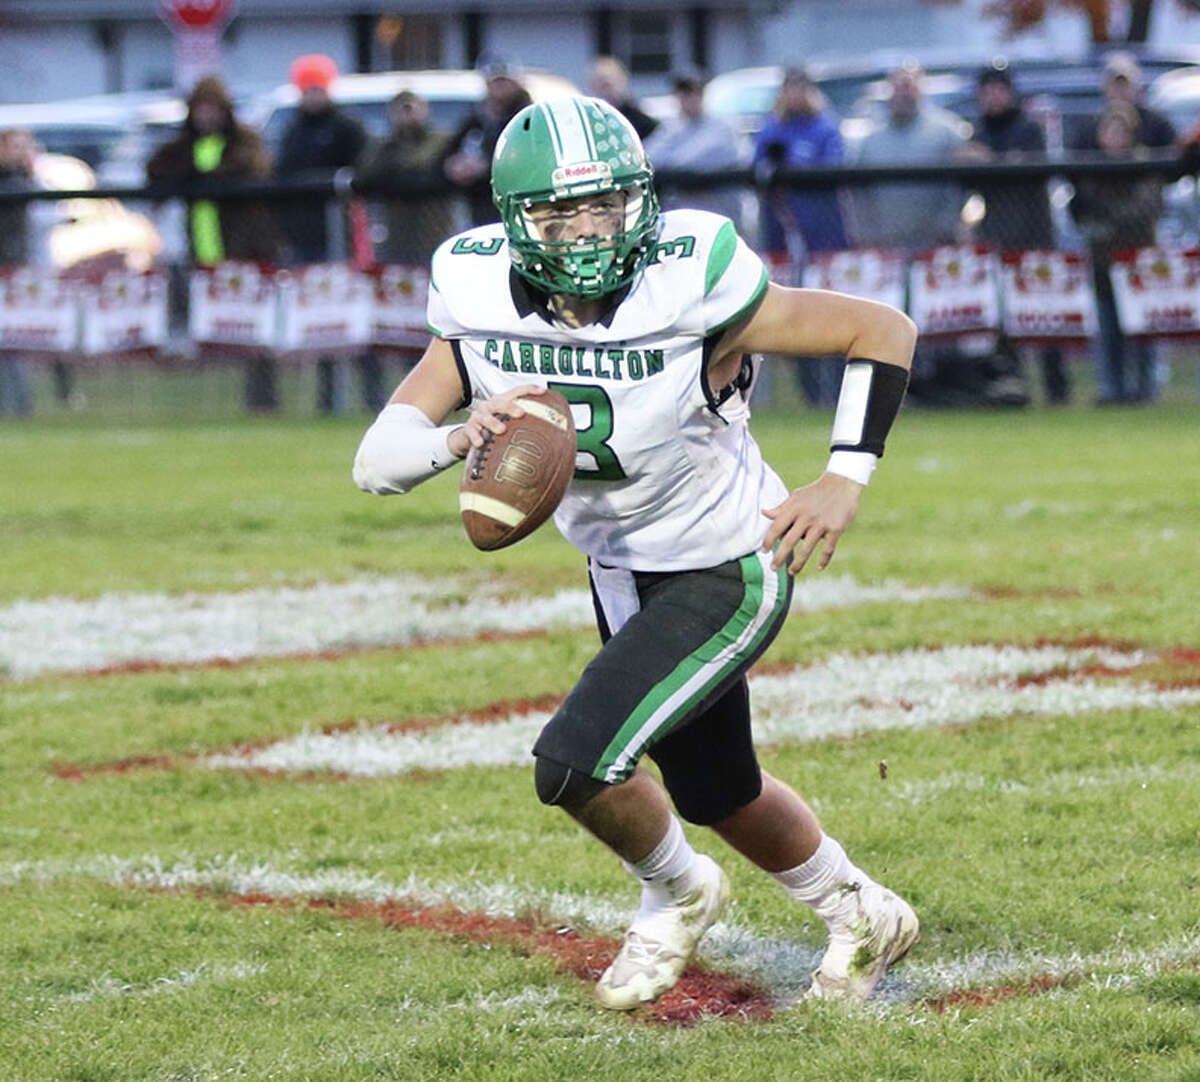 Carrollton quarterback Grant Pohlman rolls out with the football against Moweaqua Central A&M in a Class 1A semifinal last November in Moweaqua. Pohlman is the 2021 Telegraph Small-Schools Football Player of the Year.